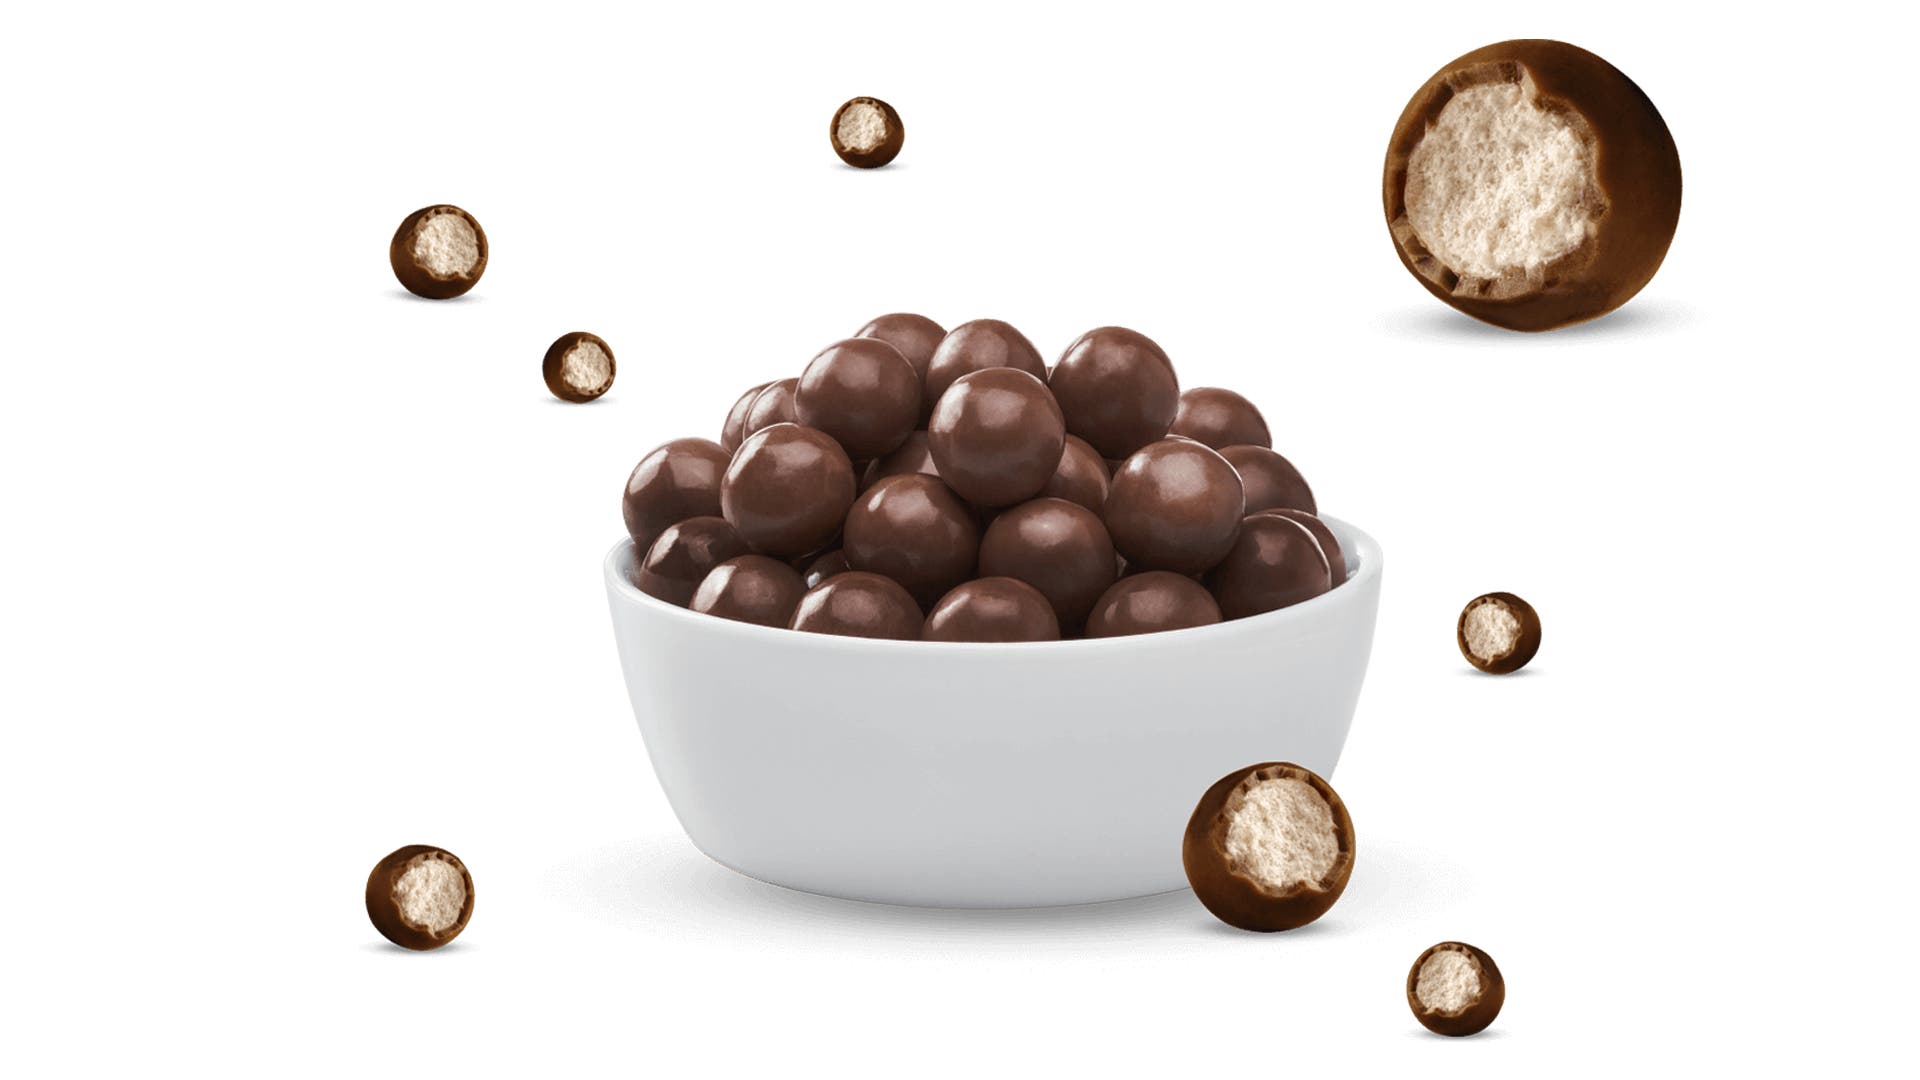 WHOPPERS Malted Milk Balls